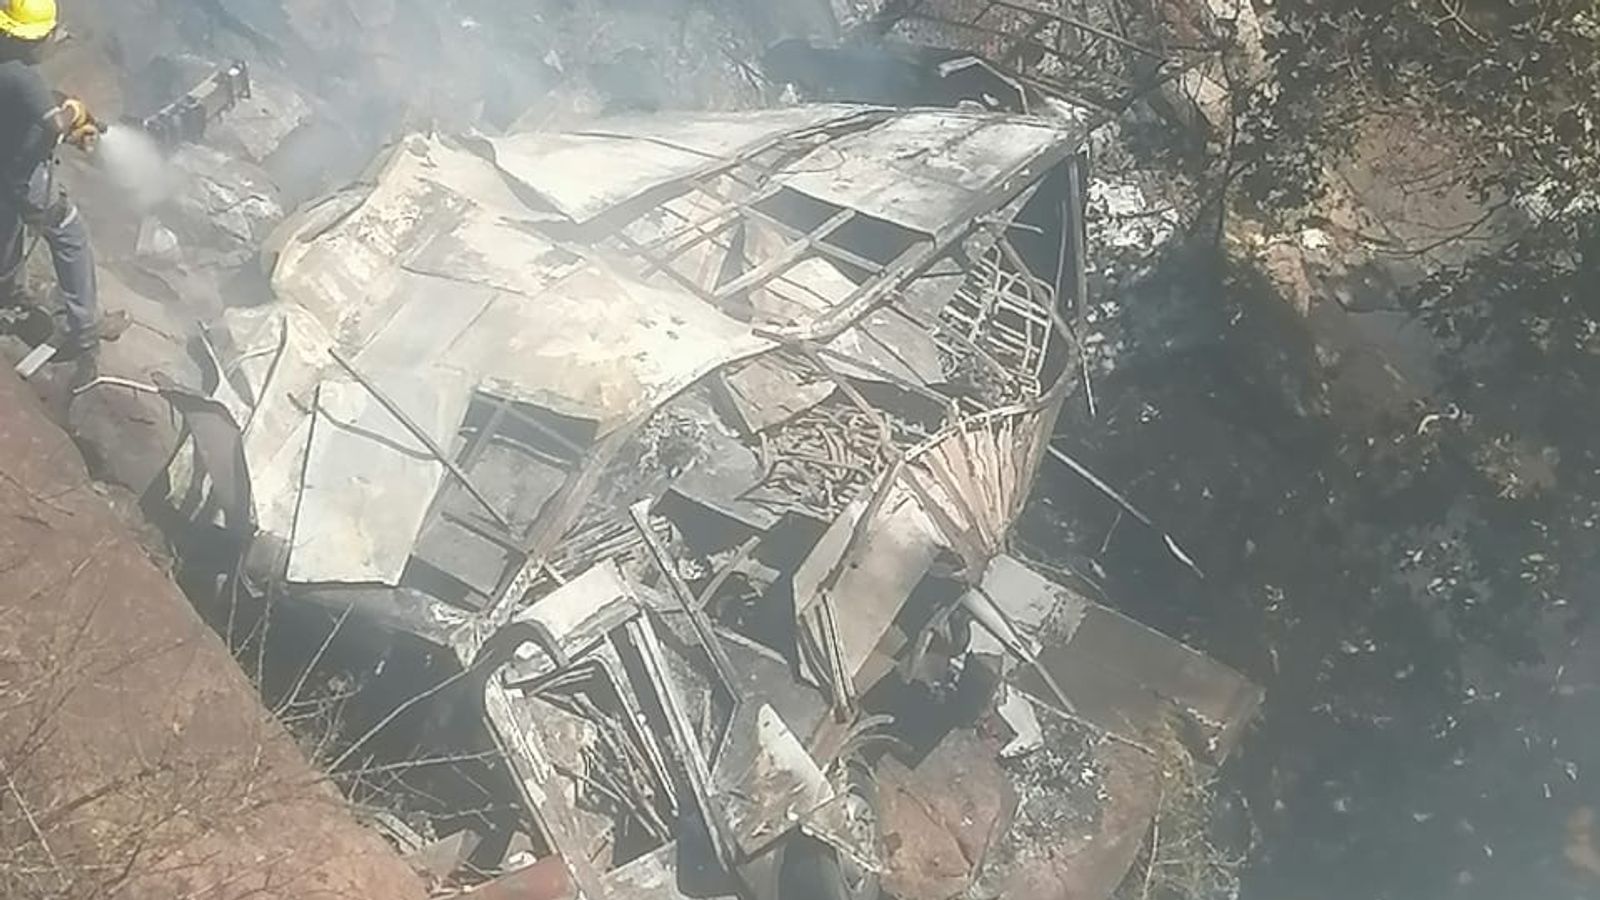 45 people killed in bus crash in south africa – child, 8, the sole survivor